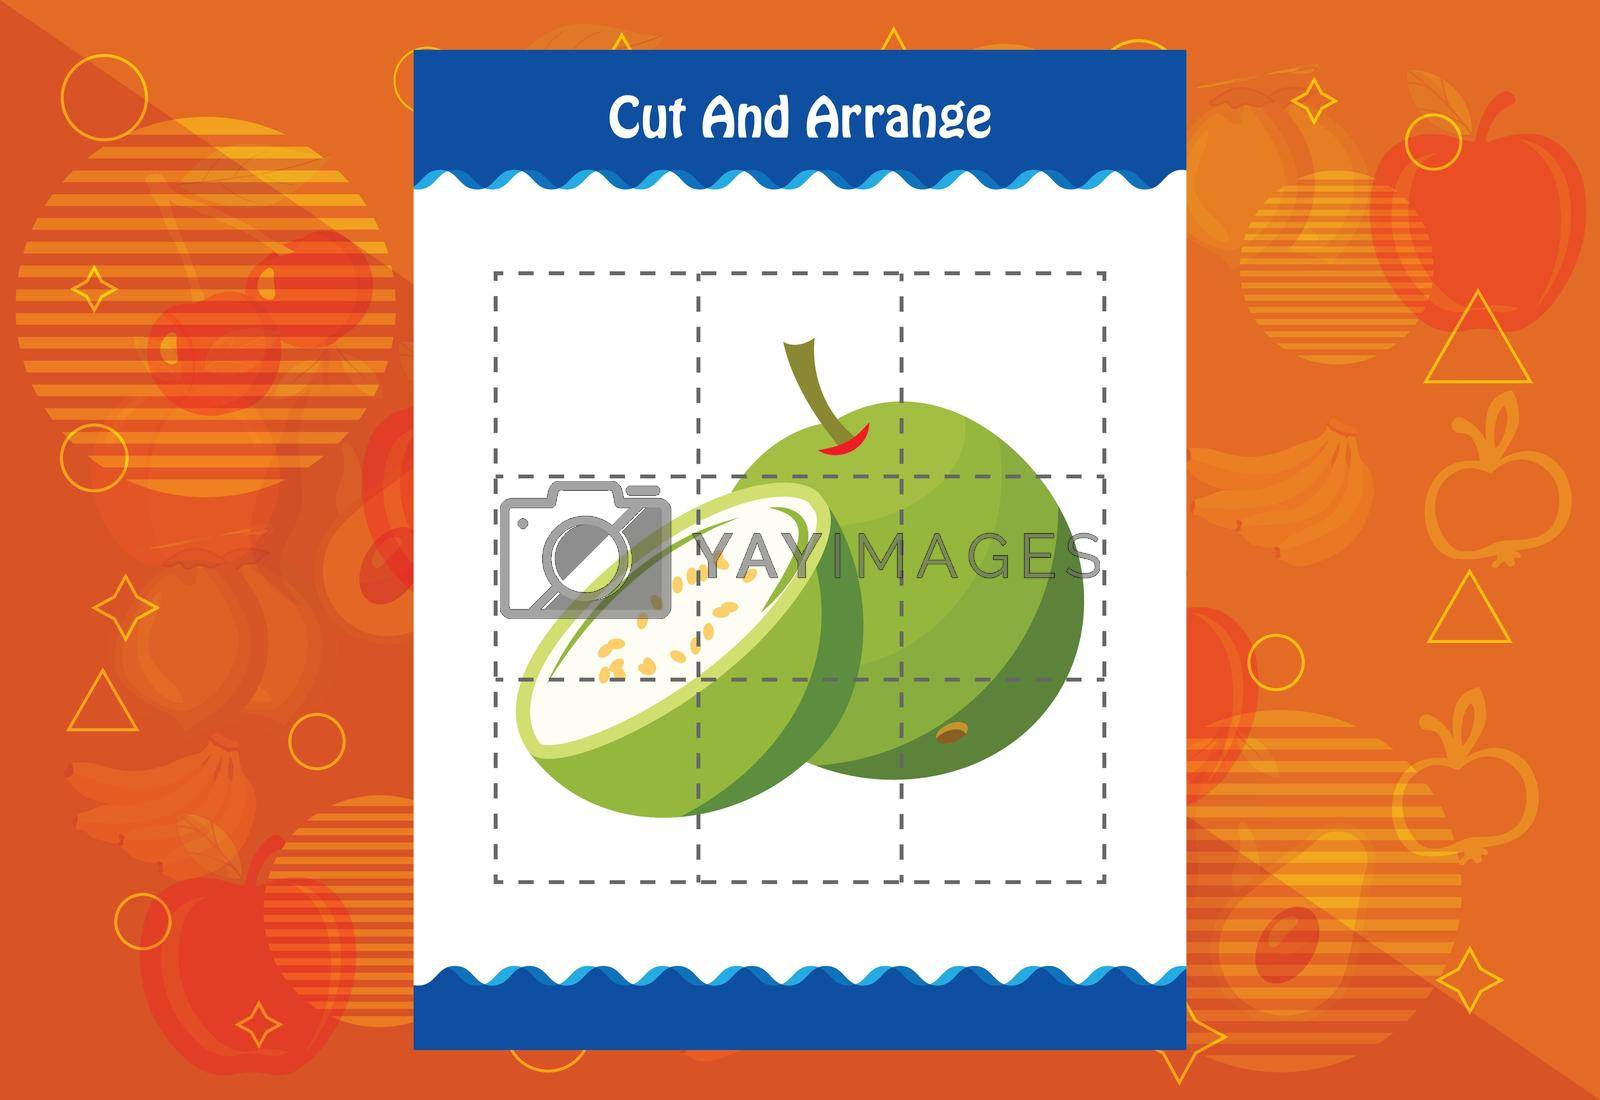 Royalty free image of Cut and arrange with a fruit worksheet for kids. Educational game for children by busrat